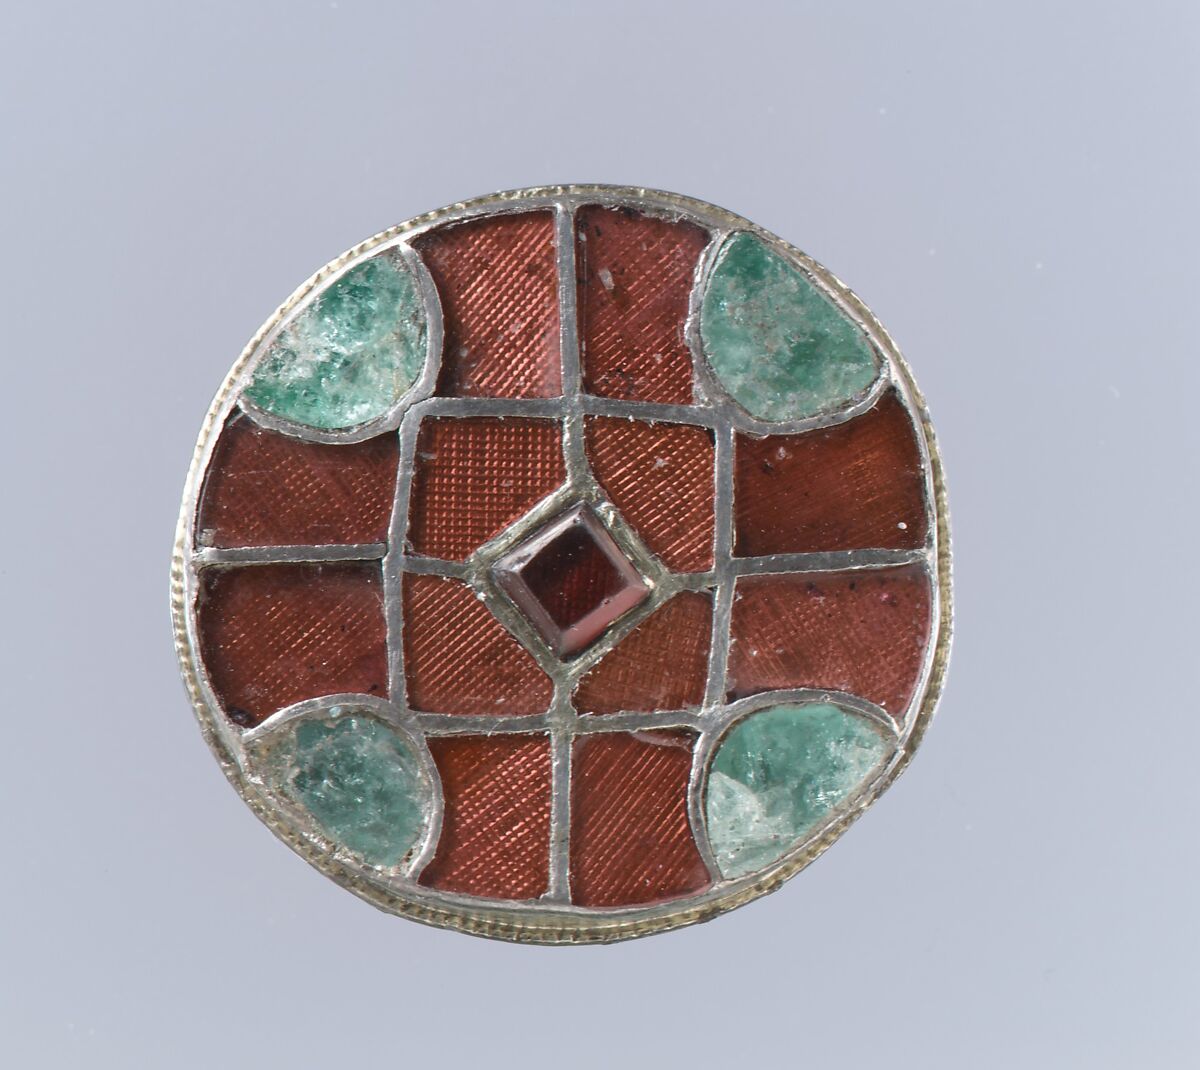 Disk Brooch, Silver-gilt cells, side strip, and beaded edging; garnets with deep-punched, "standard" foil backings; emerald; silver back with posts for spring and pin; no spring/pin extant, Frankish